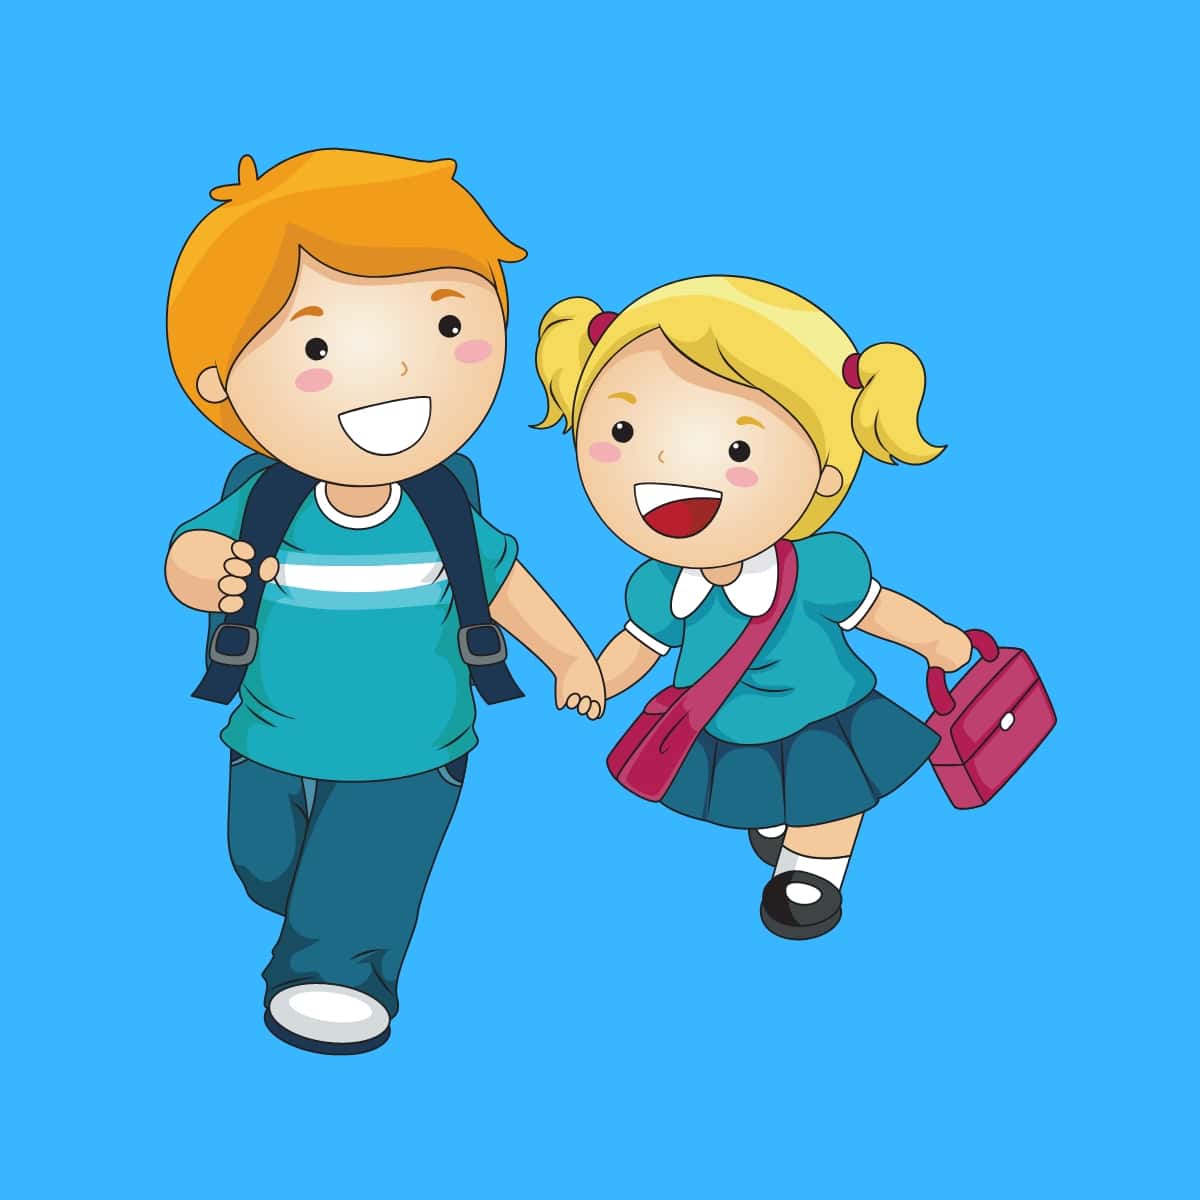 Cartoon graphic of brother and sister walking to school holding hands on a blue background.